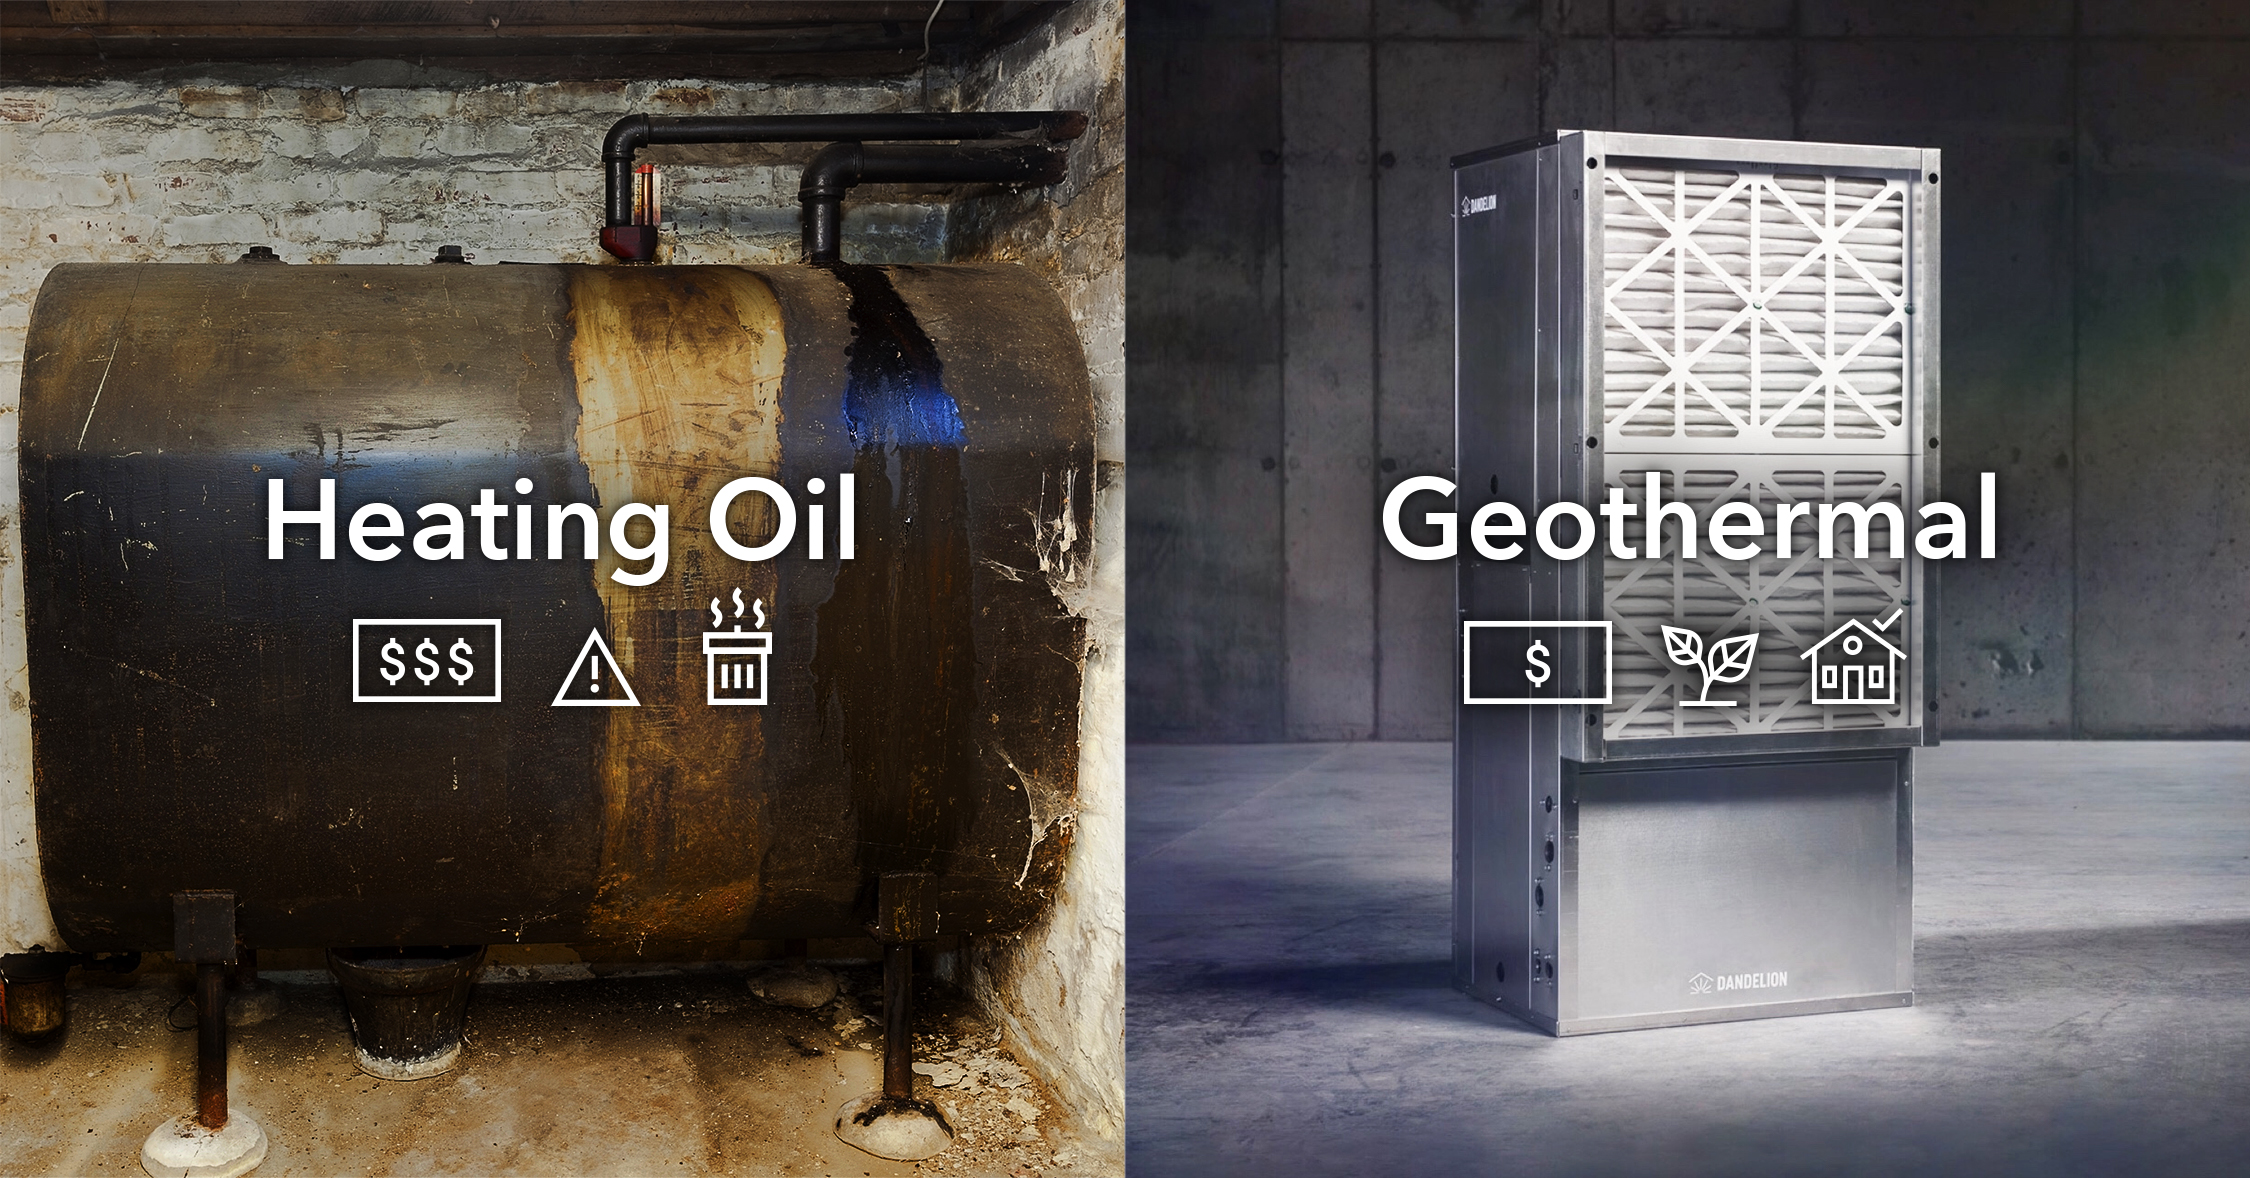 A side by side ad of an oil tank, labeled 'Heating Oil' and a Dandelion Geothermal label labeled 'Geothermal'.